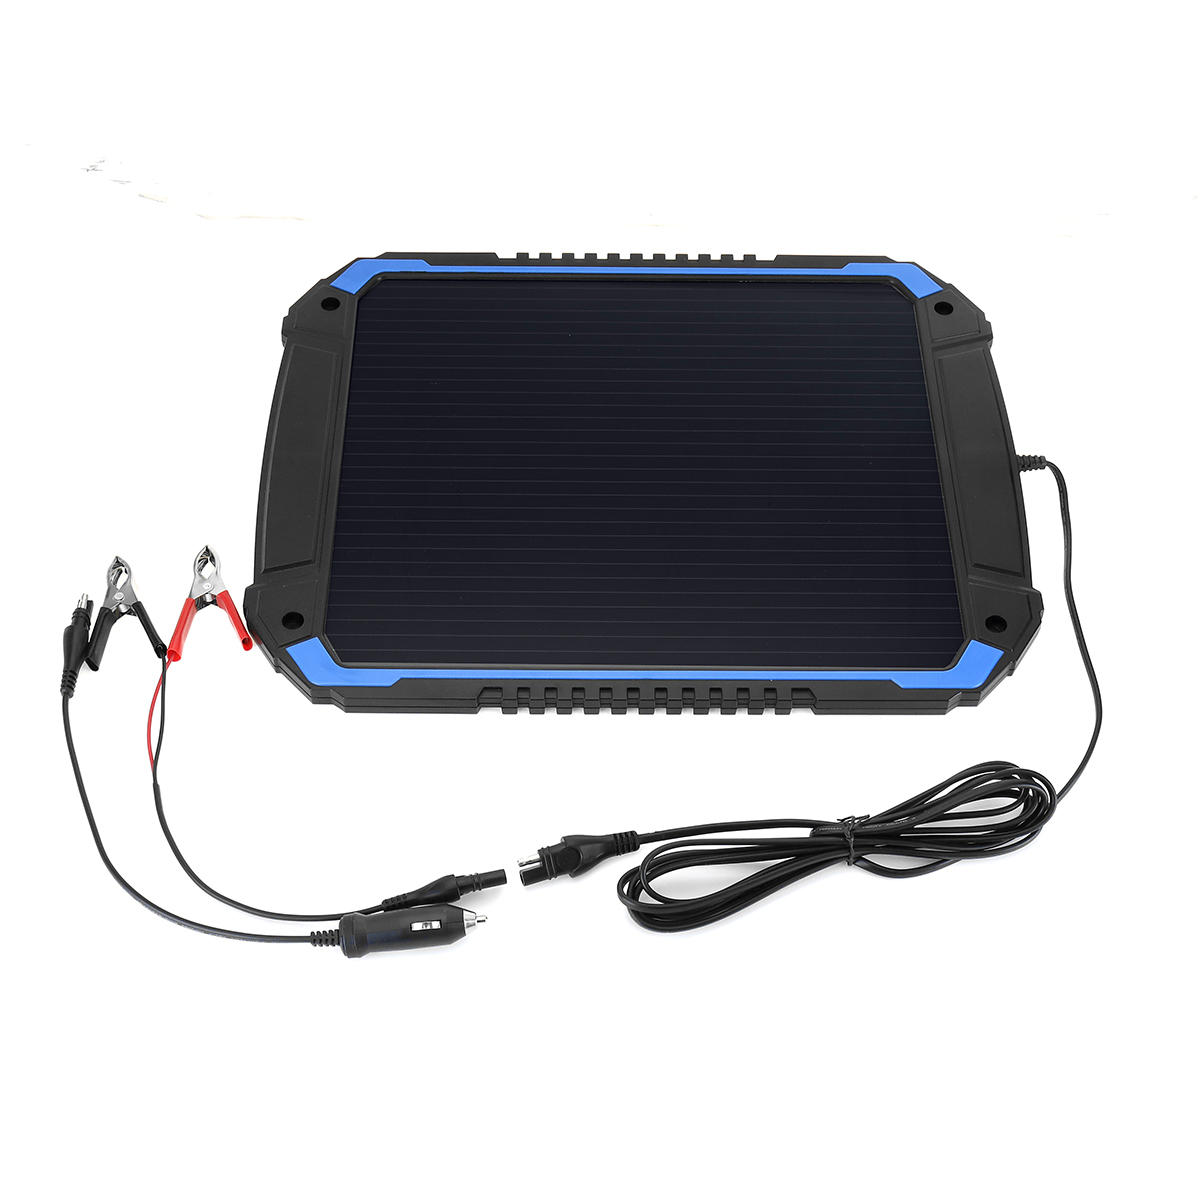 4.8W 18V Portable Solar Panel Power Battery Charger Backup for Automotive Motorcycle Boat Marine RV etc COD